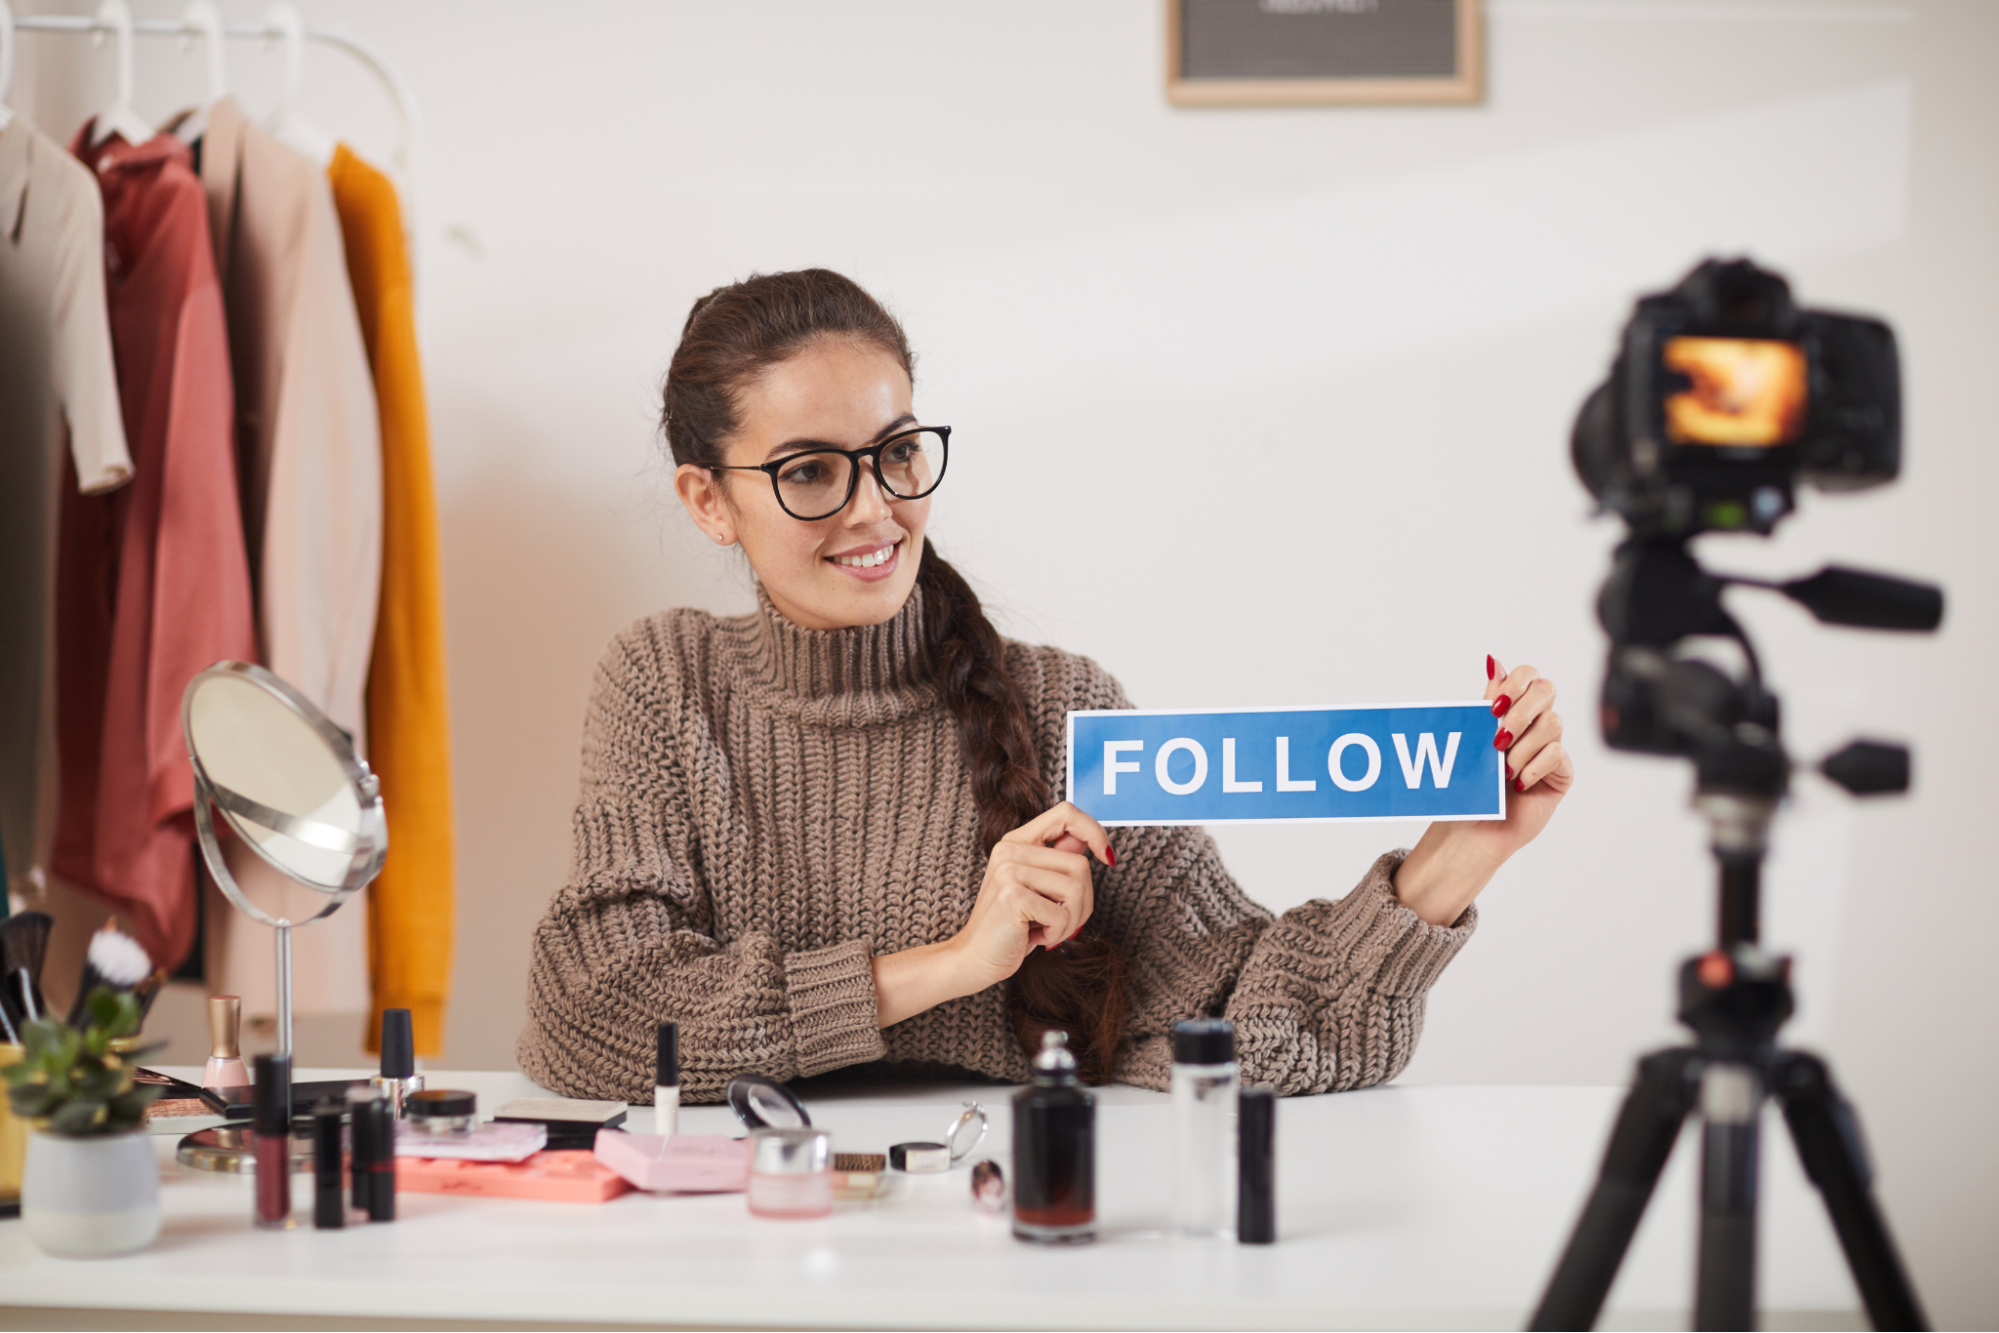 How to Grow Your Instagram Following - A Newbie's Guide